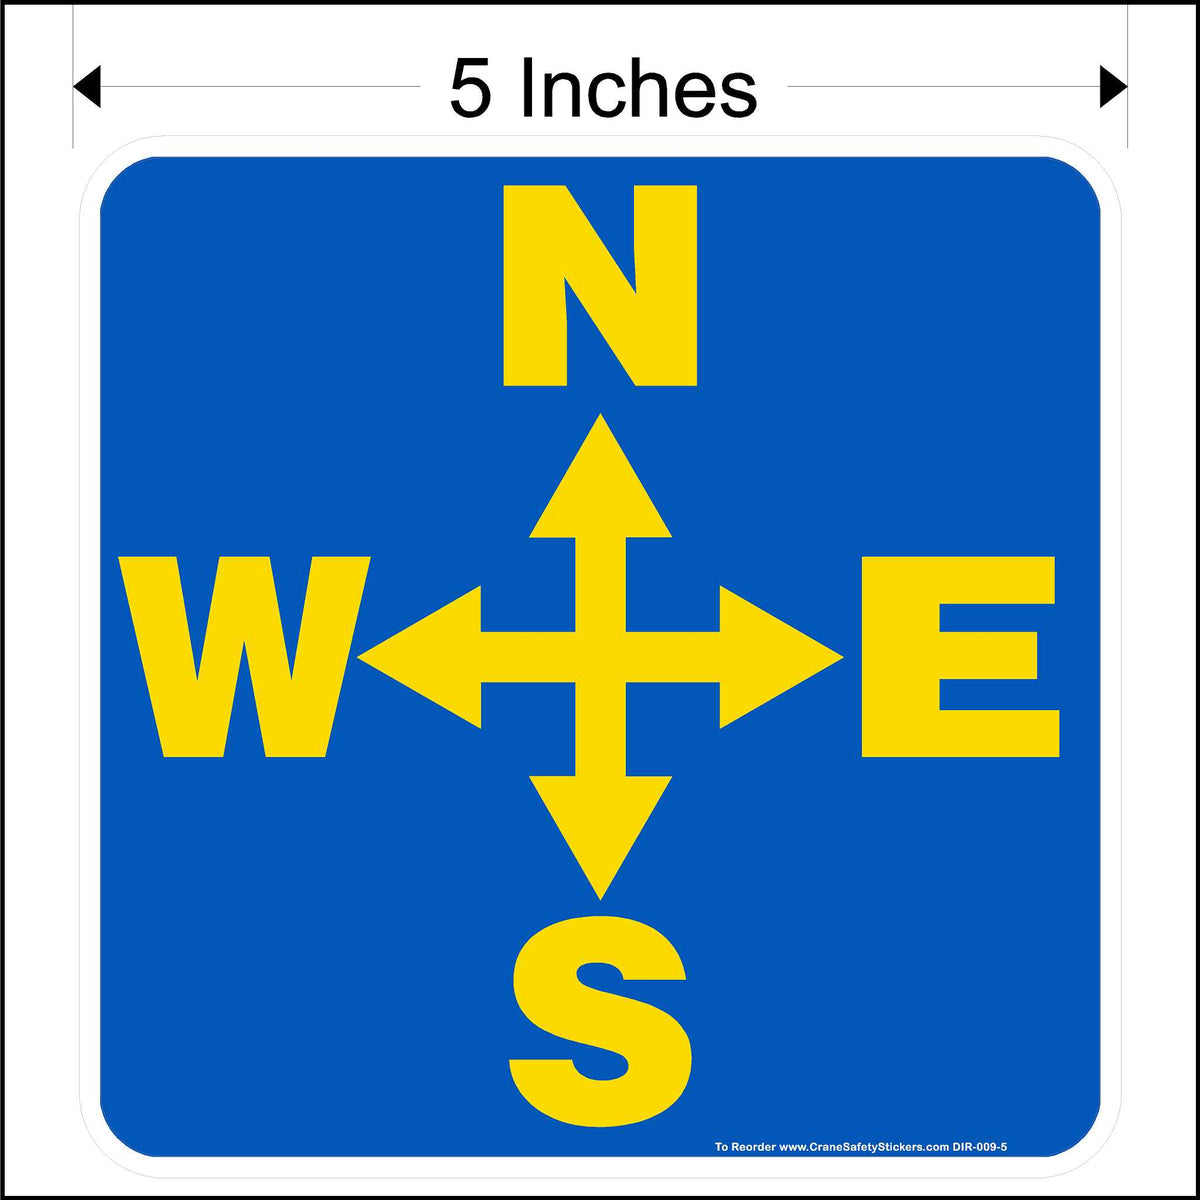 5 inch overhead crane directional decal printed with yellow north, south, east, and west arrows on a blue background.